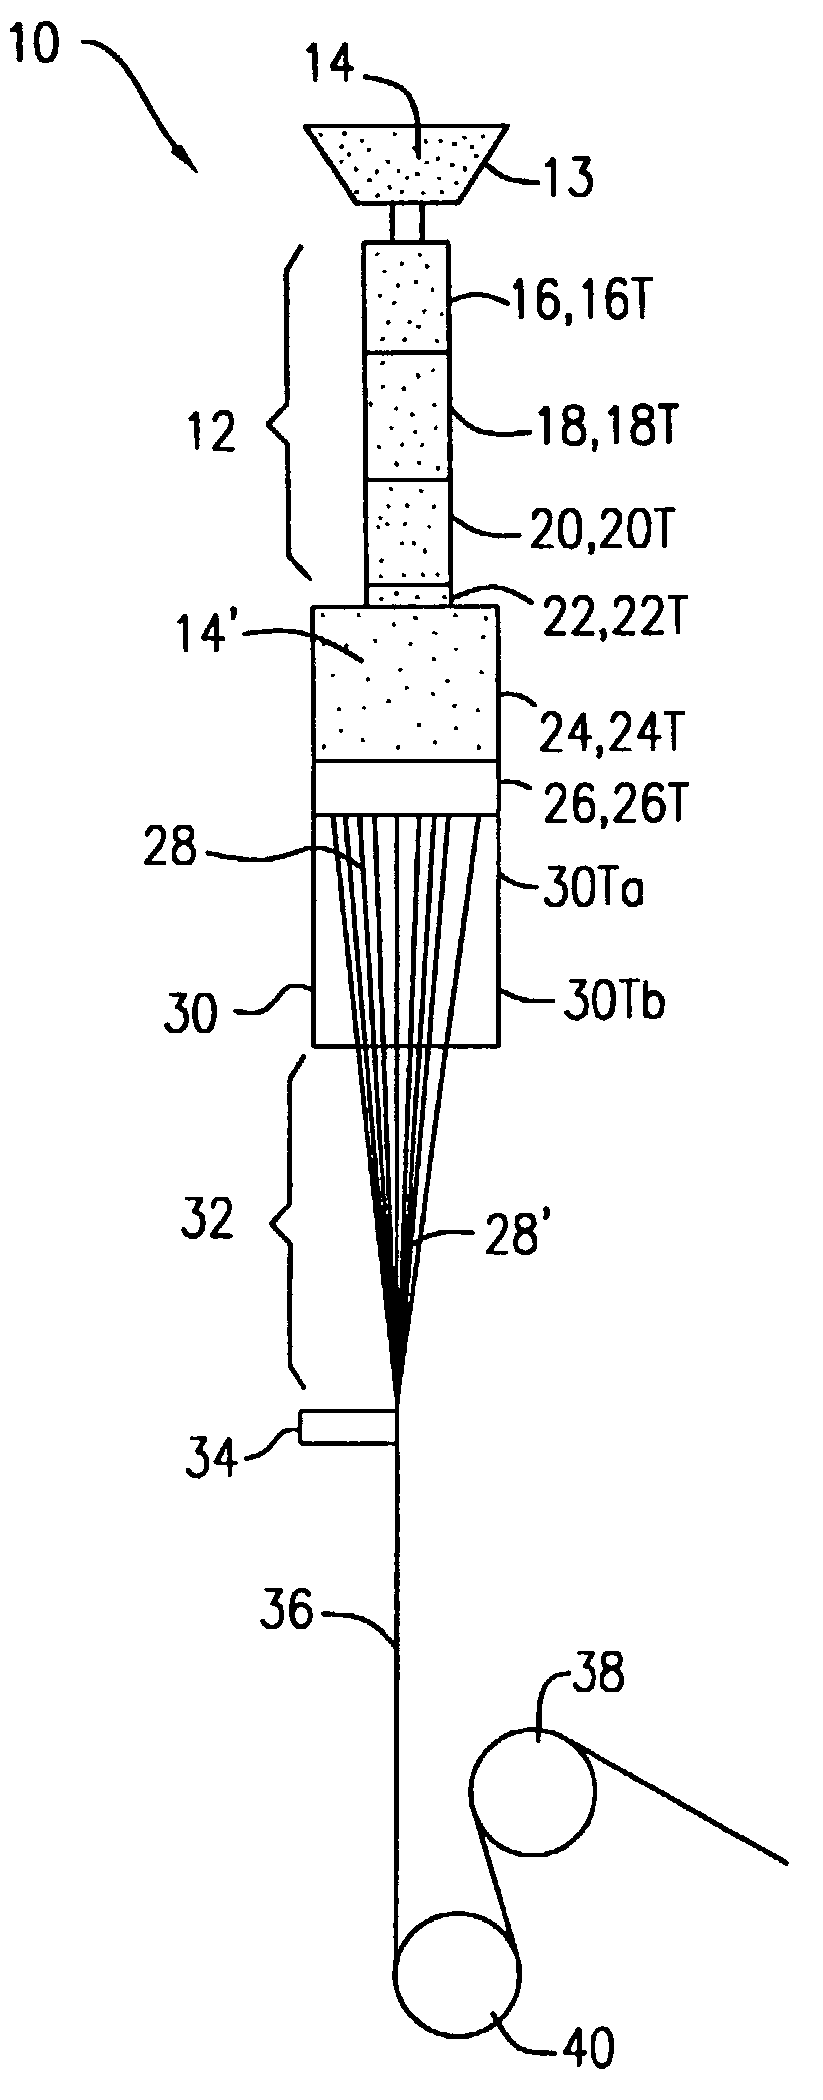 Process for the formation of high strength bio-absorbable suture fibers